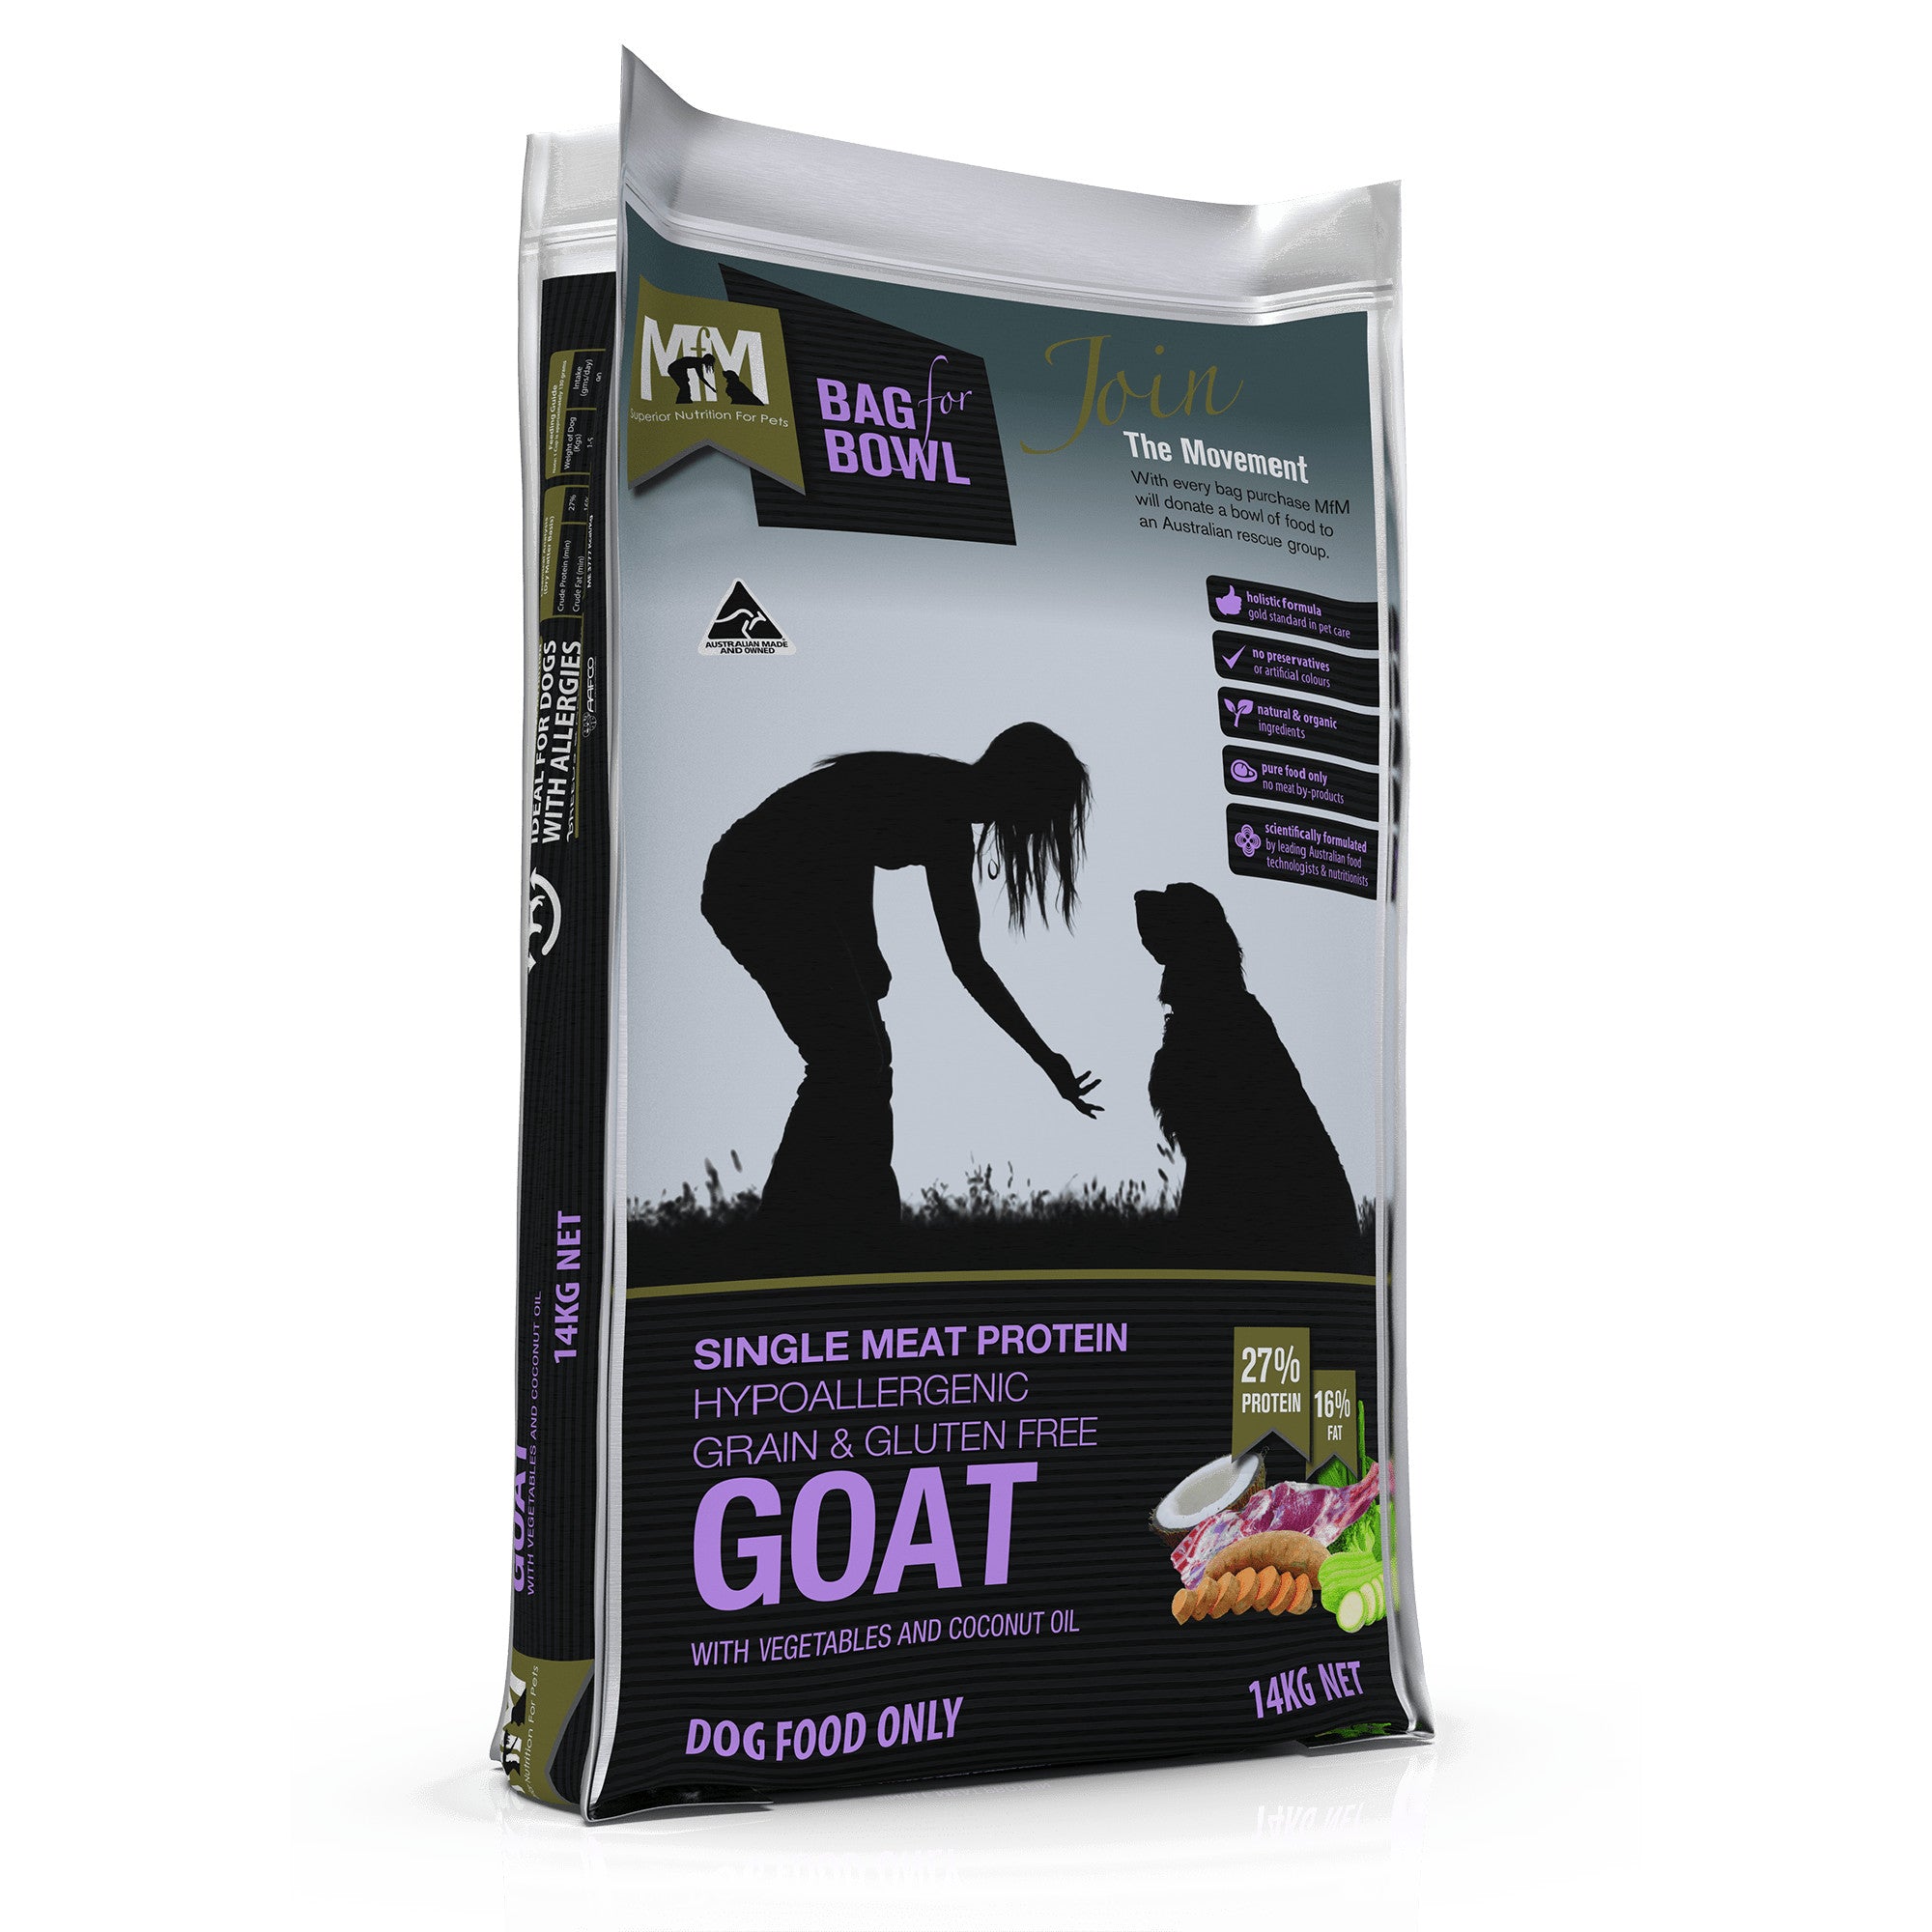 Meals for Mutts Goat Single Meat Protein Dog Food 14kg.